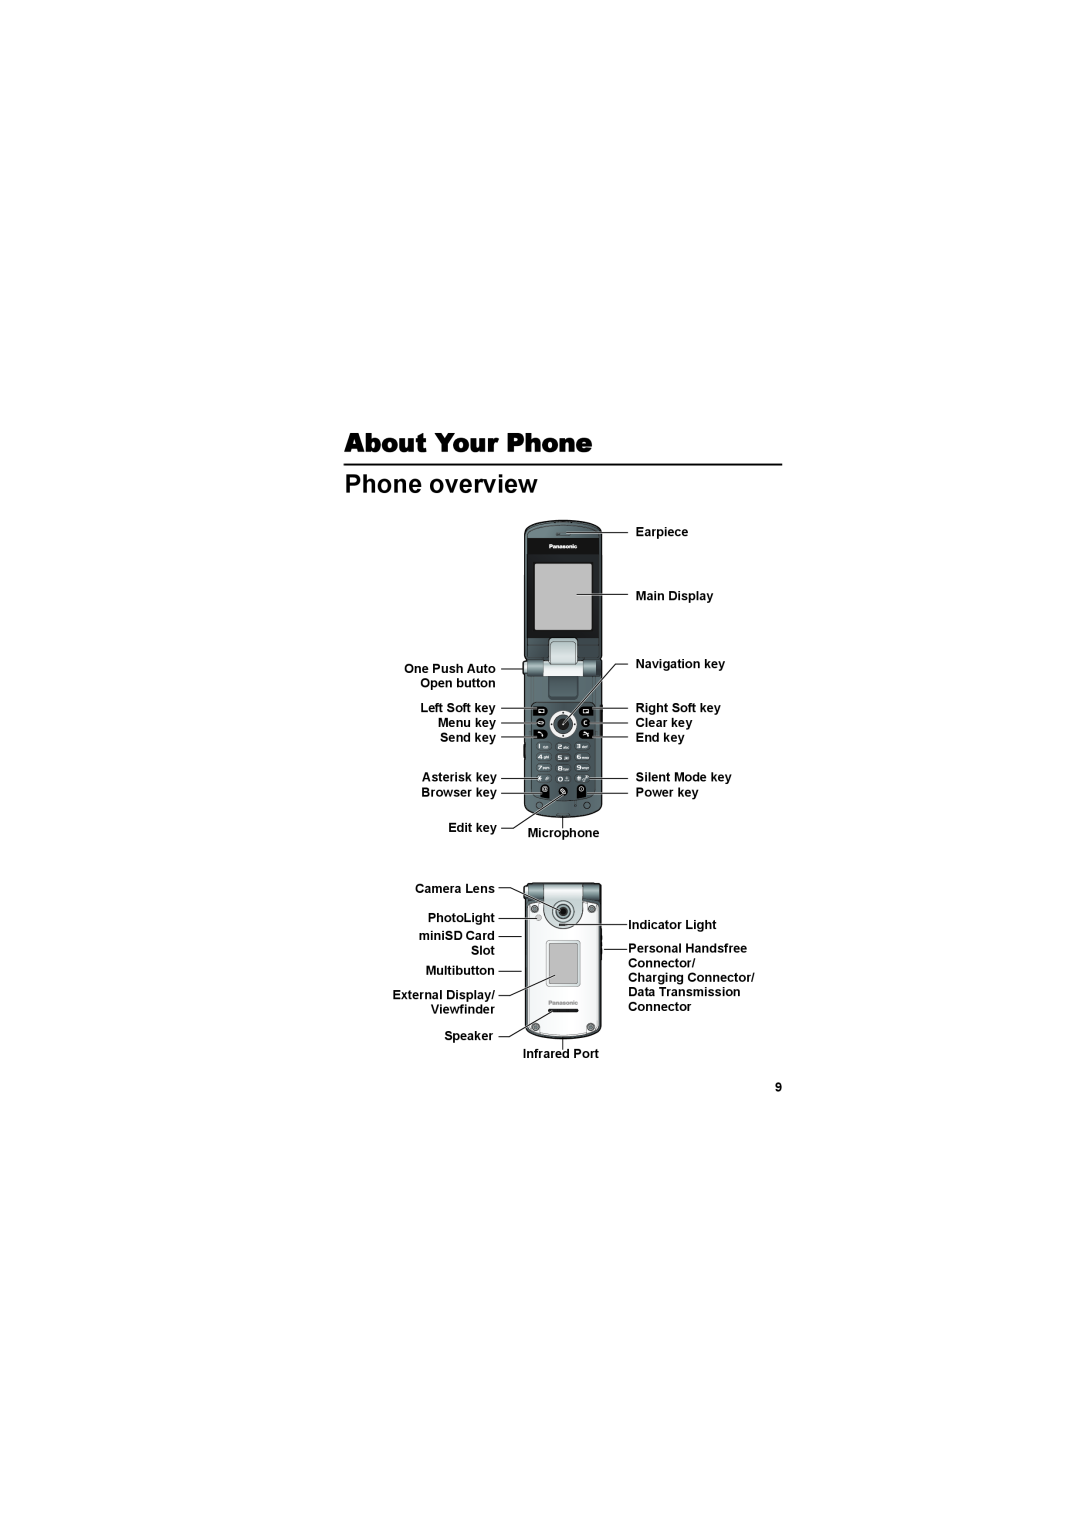 Panasonic EB-X800 manual About Your Phone Phone overview, Navigation key, Charging Connector, External Display 